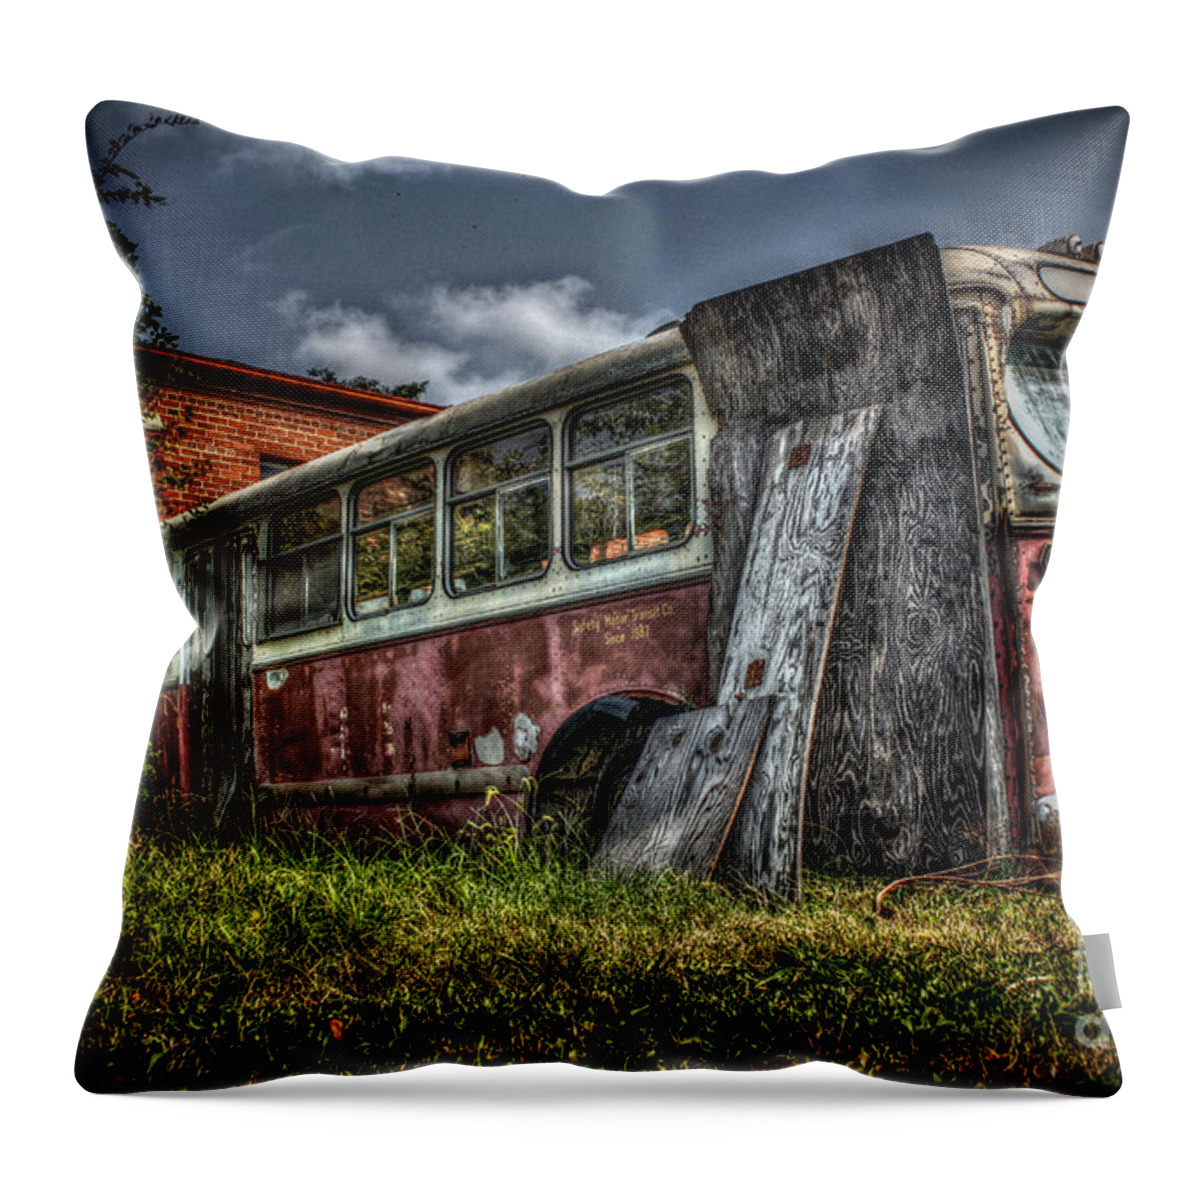 Vehicle Throw Pillow featuring the digital art You've Taken The Last Ride by Dan Stone